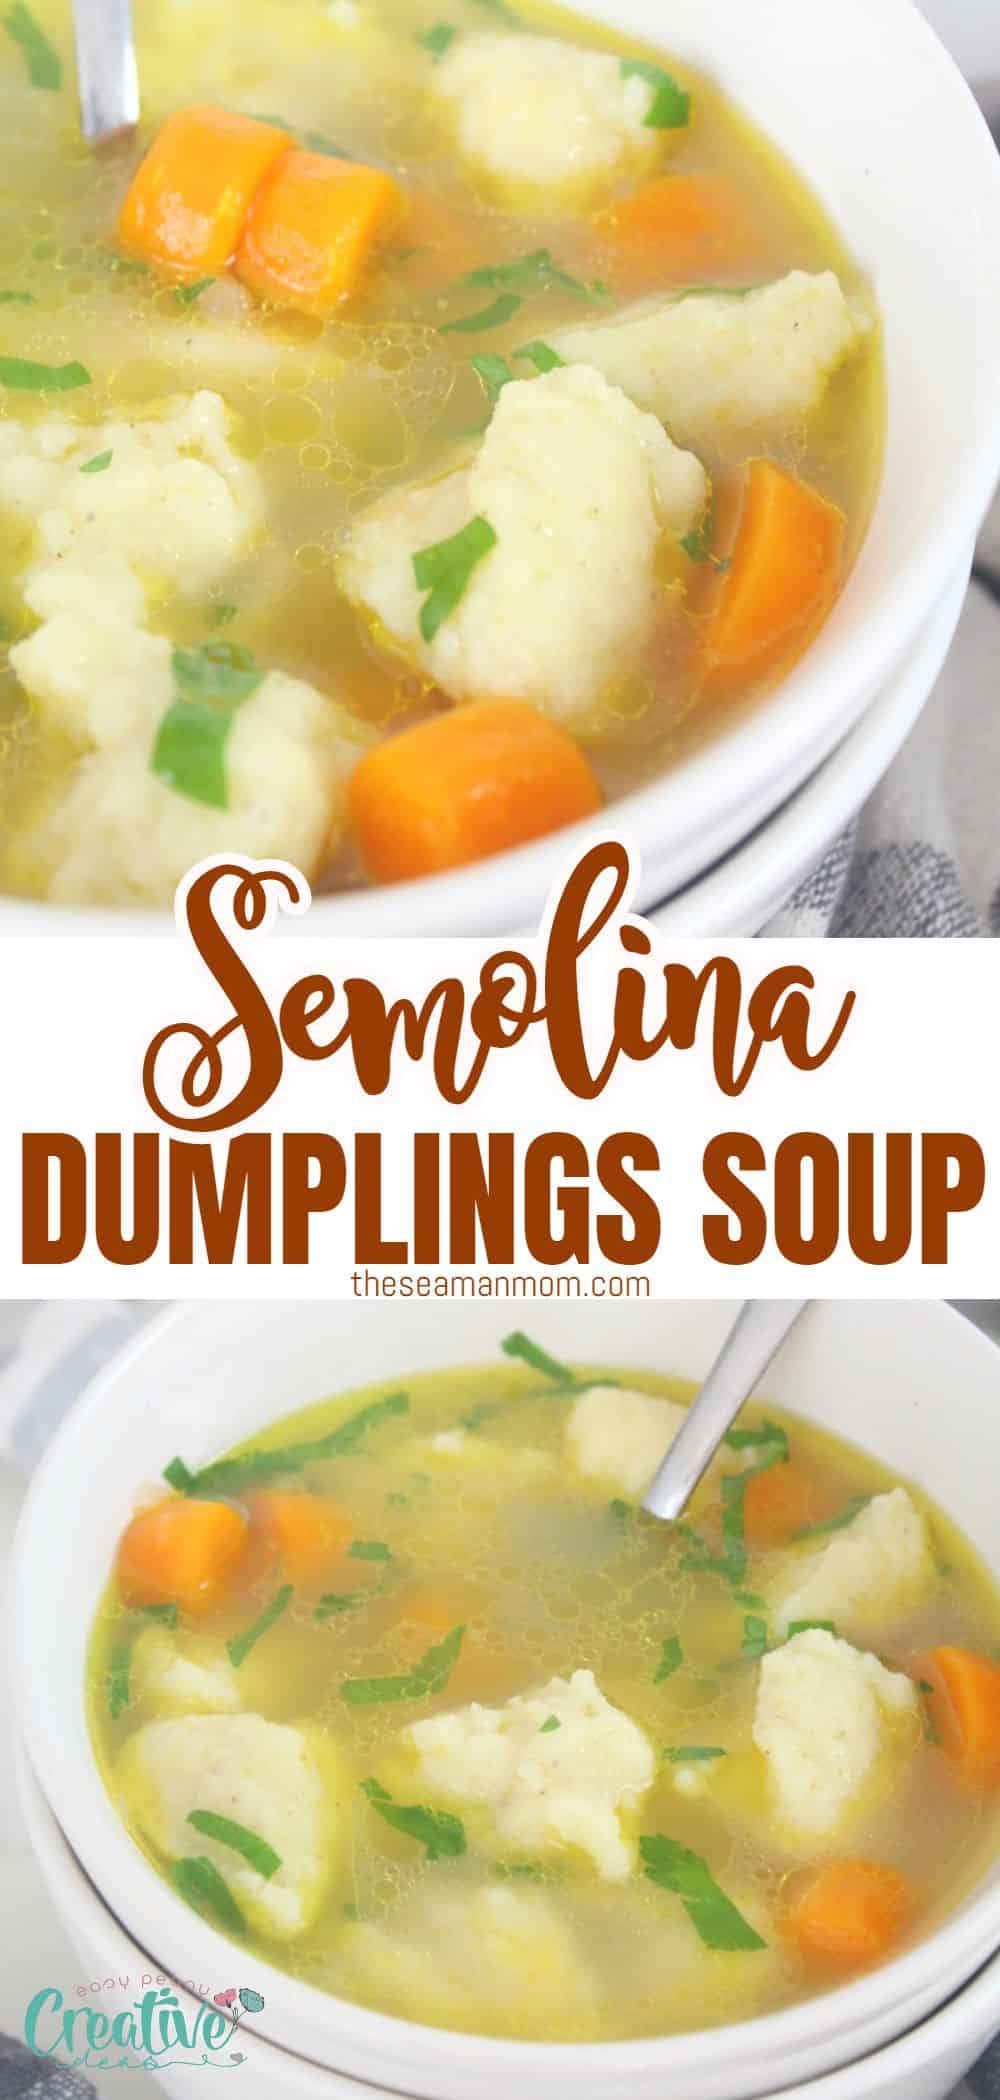 Discover the secret to making Semolina Dumplings Soup - a popular dish in German-speaking countries and amongst people of German origin. Not only is it easy to make, but with its tantalizing taste, you'll want this delicious entrée or warm winter meal every night! Let me show you how to quickly rustle up this yummy delight that will surely satisfy even the pickiest eaters! via @petroneagu